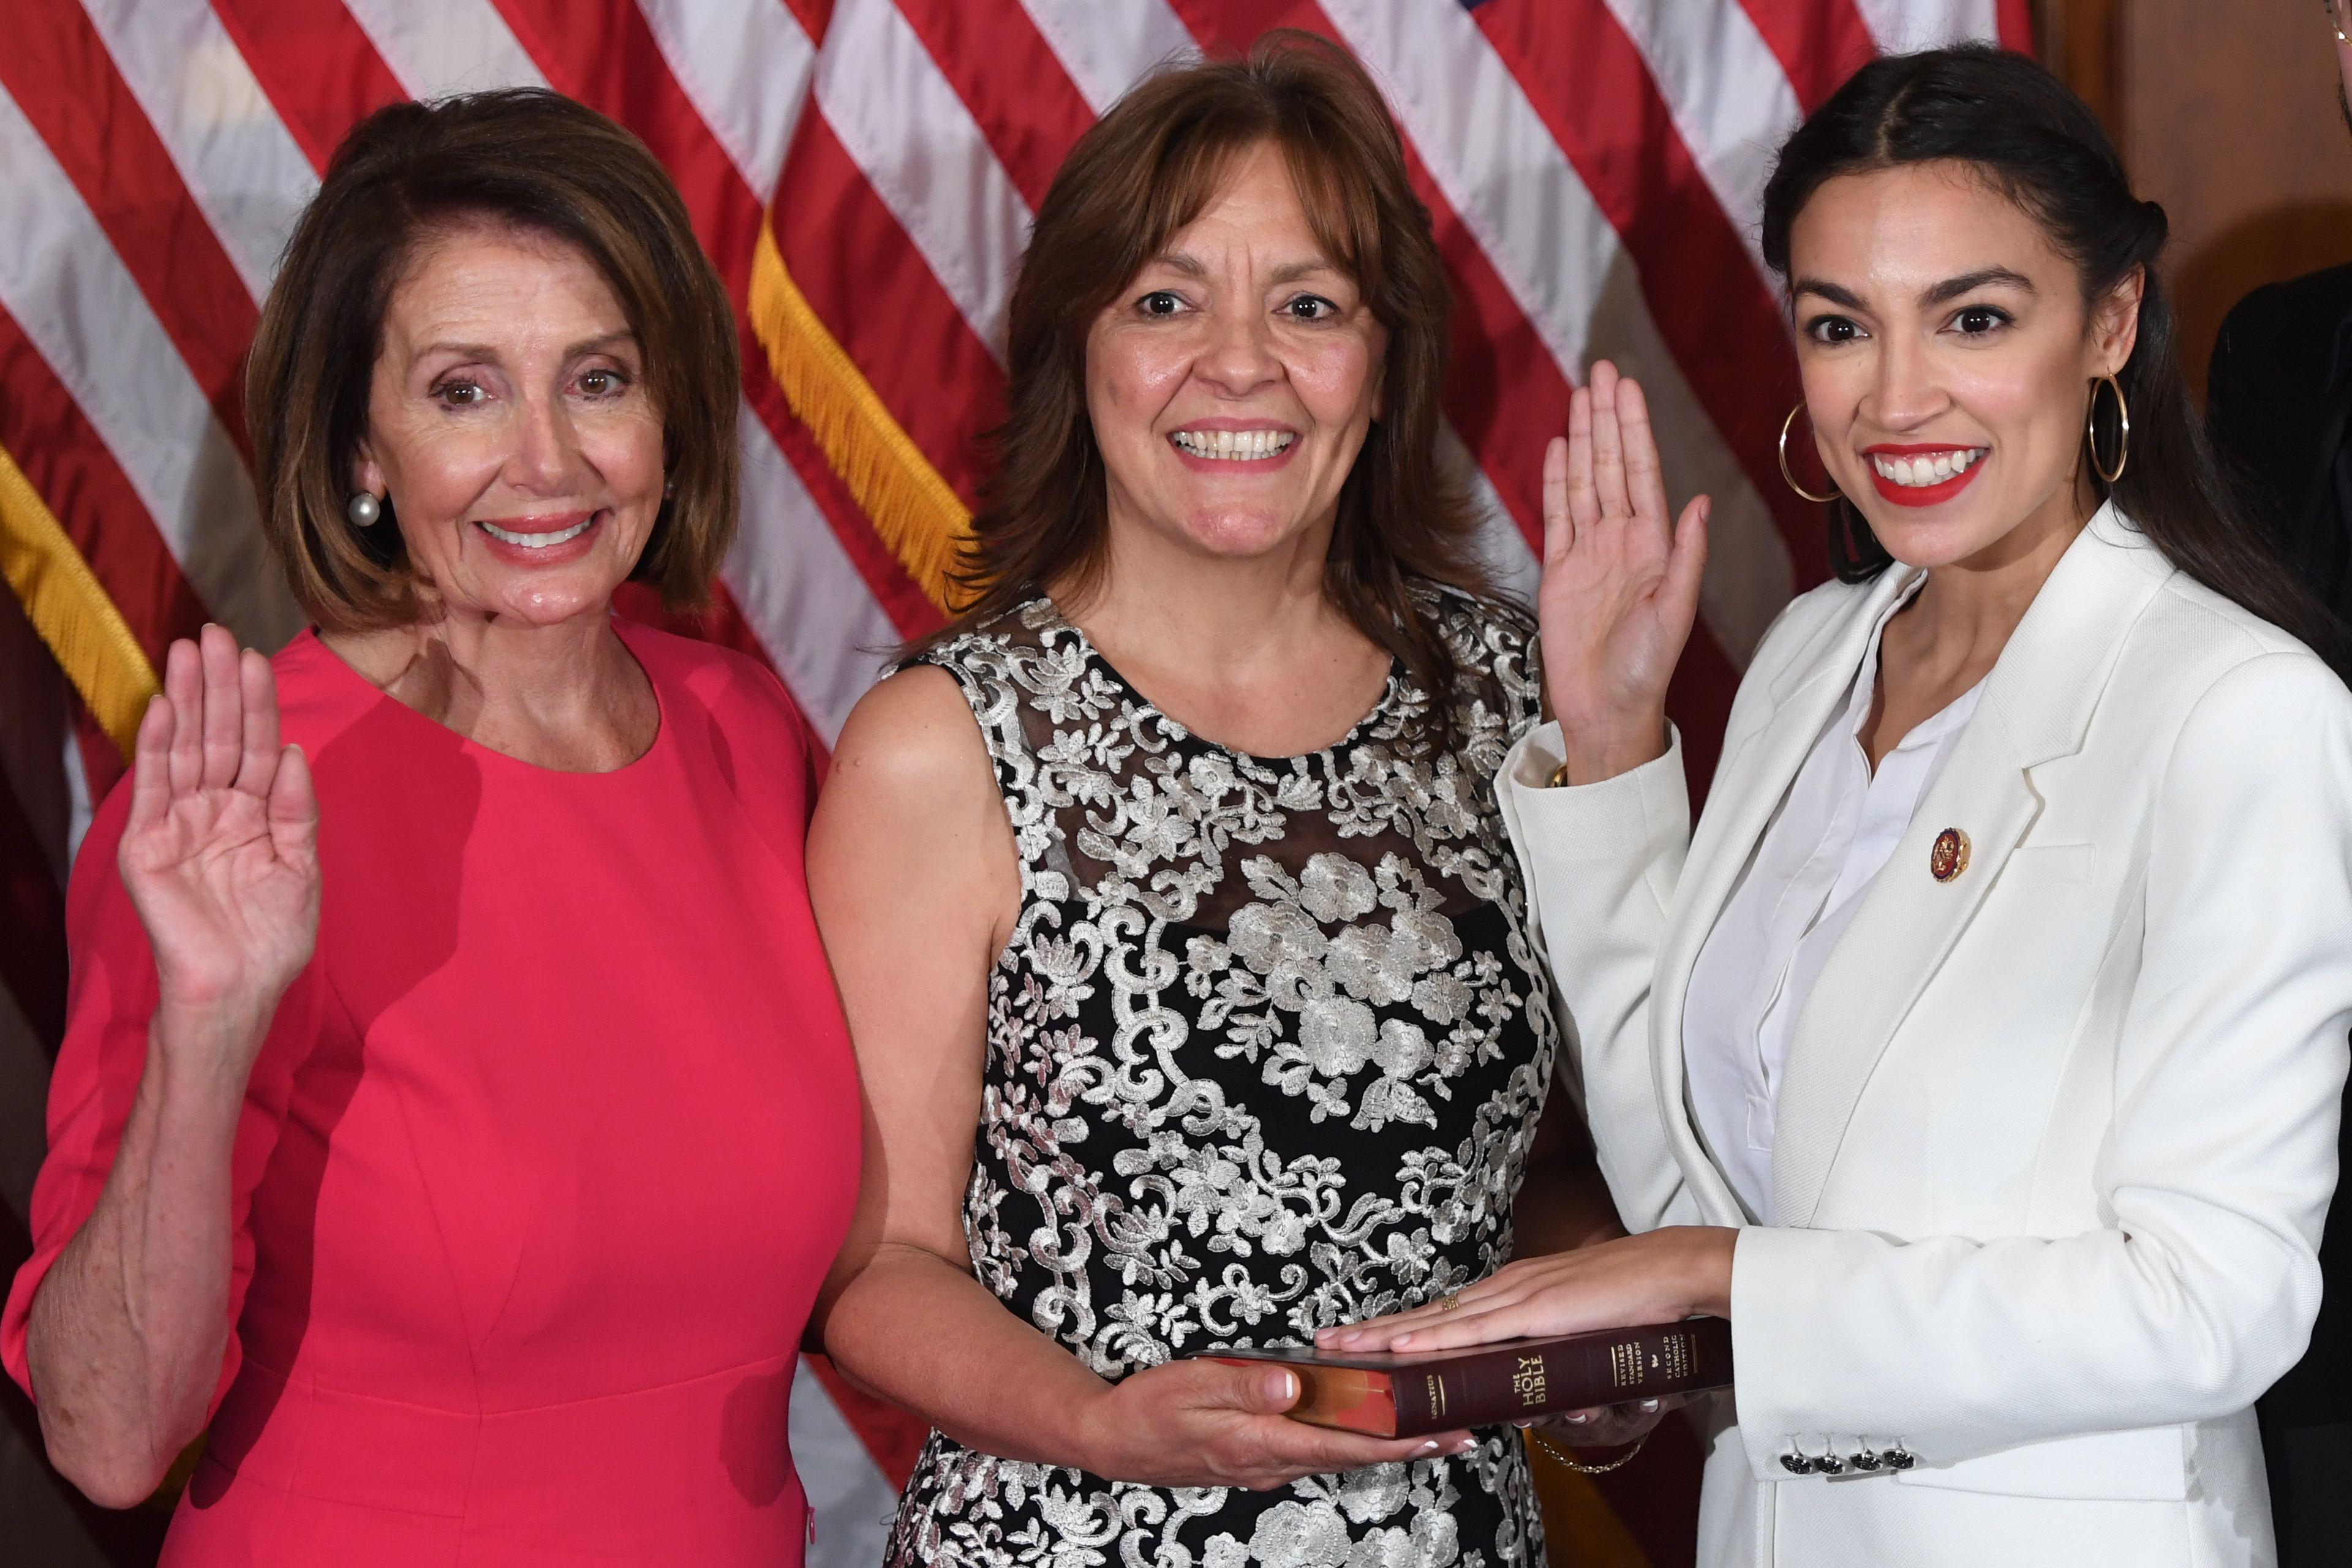 Speaker of the House Nancy Pelosi (L) performs a ceremonial swearing-in for US House Representative Alexandria Ocasio-Cortez (R), D-NY, at the start of the 116th Congress at the US Capitol in Washington, DC, January 3, 2019. (Photo by SAUL LOEB / AFP)